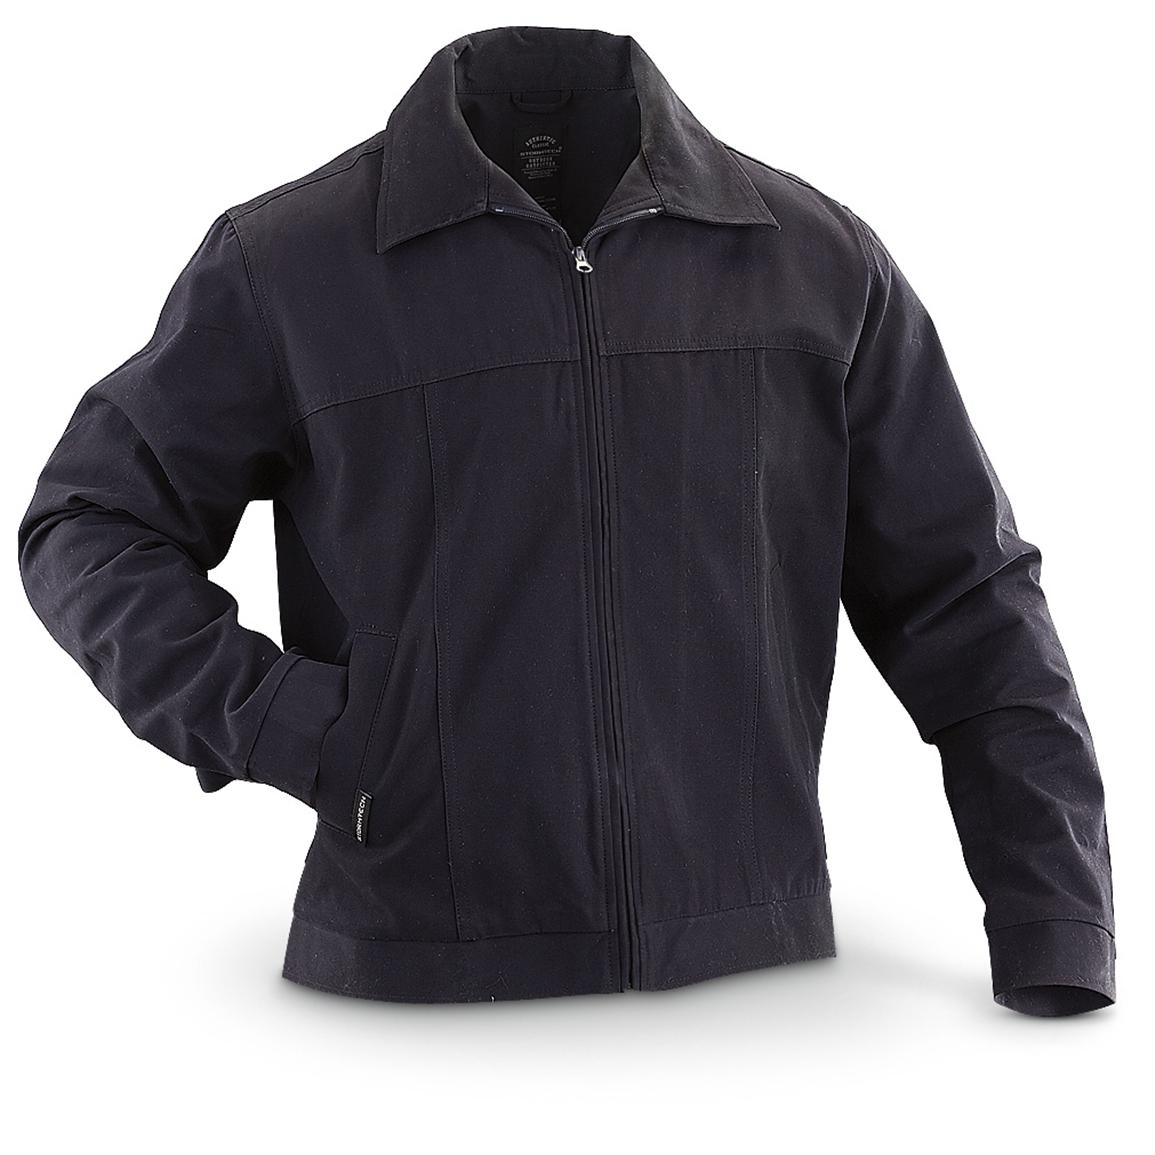 StormTech® Performance Jacket - 221108, Insulated Jackets & Coats at Sportsman's Guide